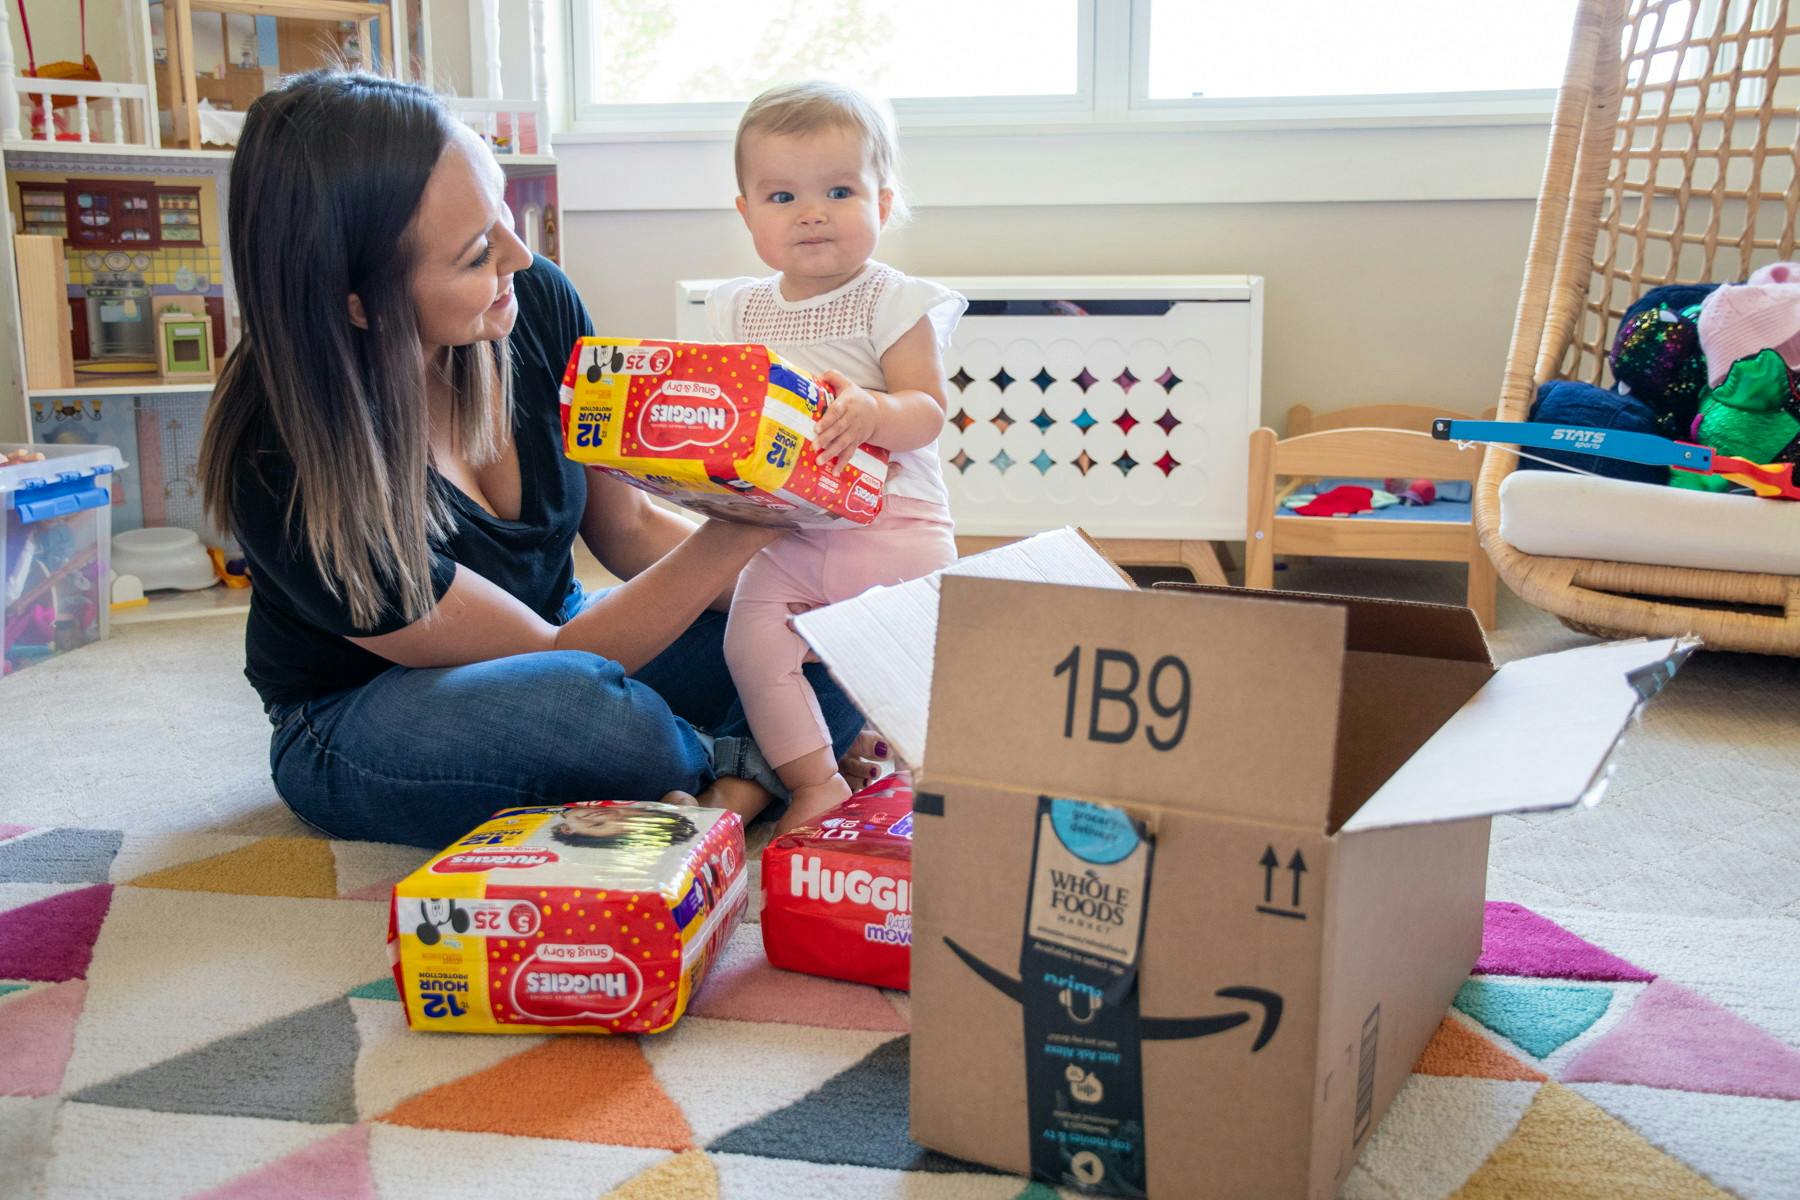 A mom sitting on the floor with her baby, surrounded by packages of Huggies diapers and an Amazon box.